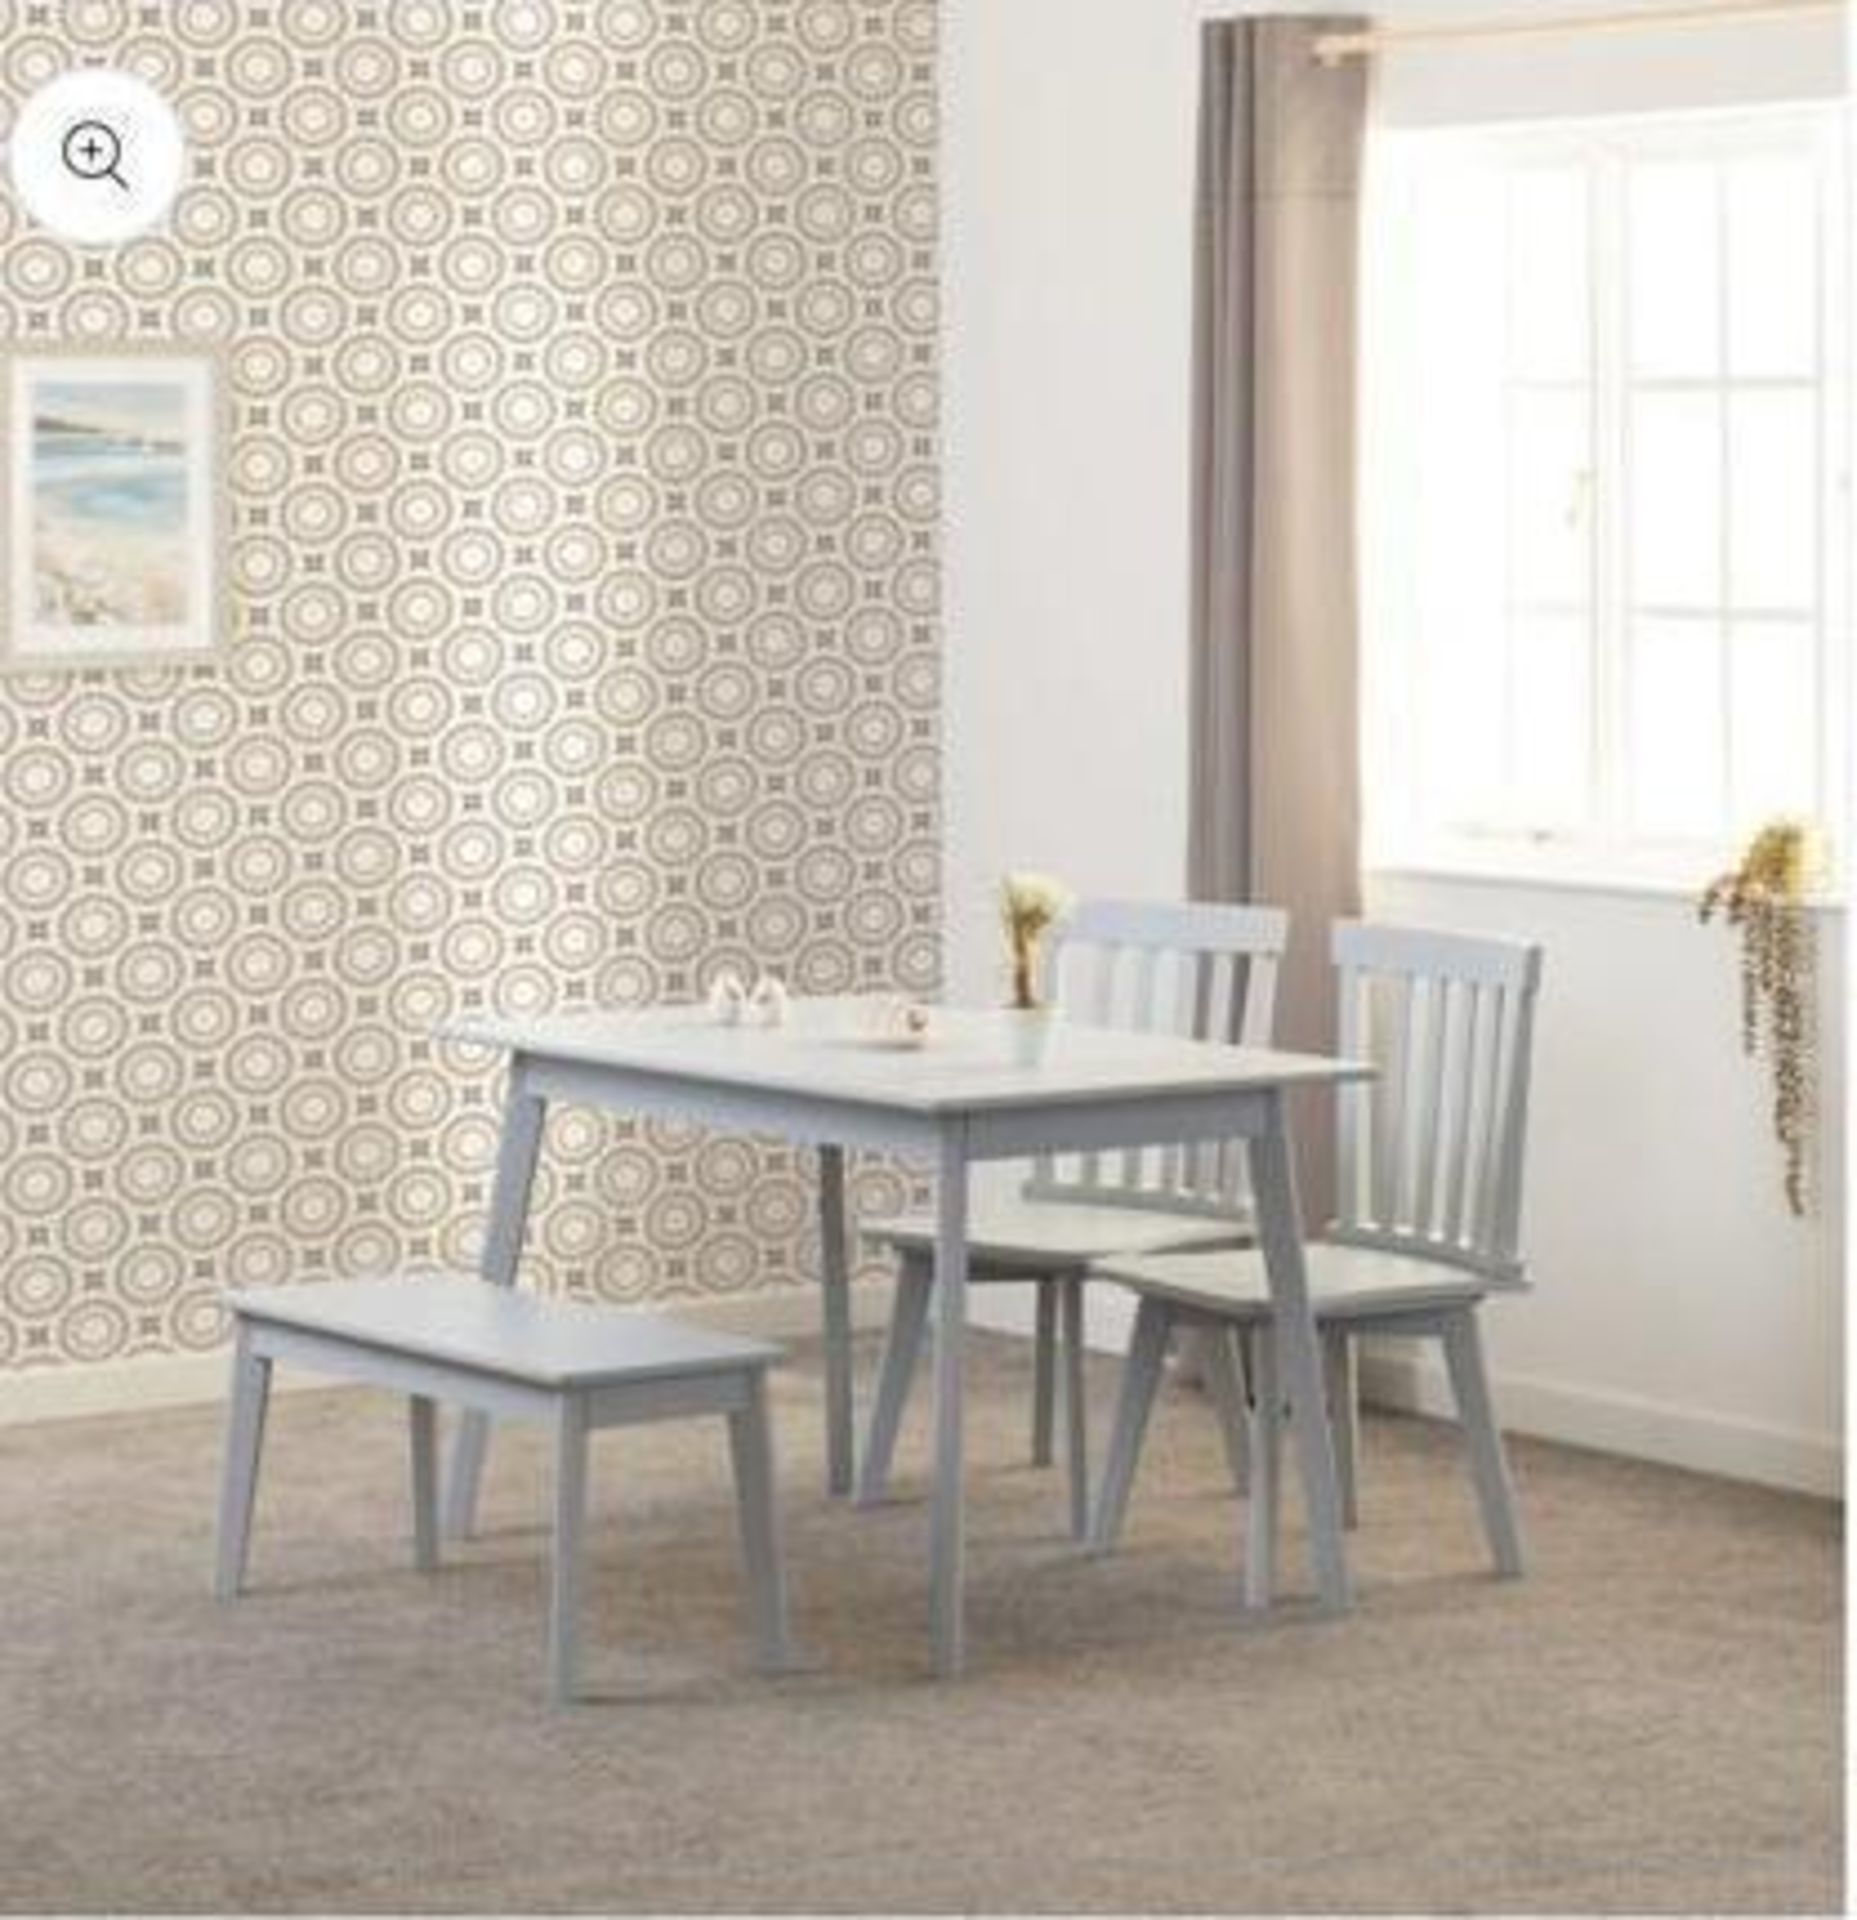 *BRAND NEW* Flat packed Matlock grey wooden 4 seater dining set with bench. RRP: £279.99.00